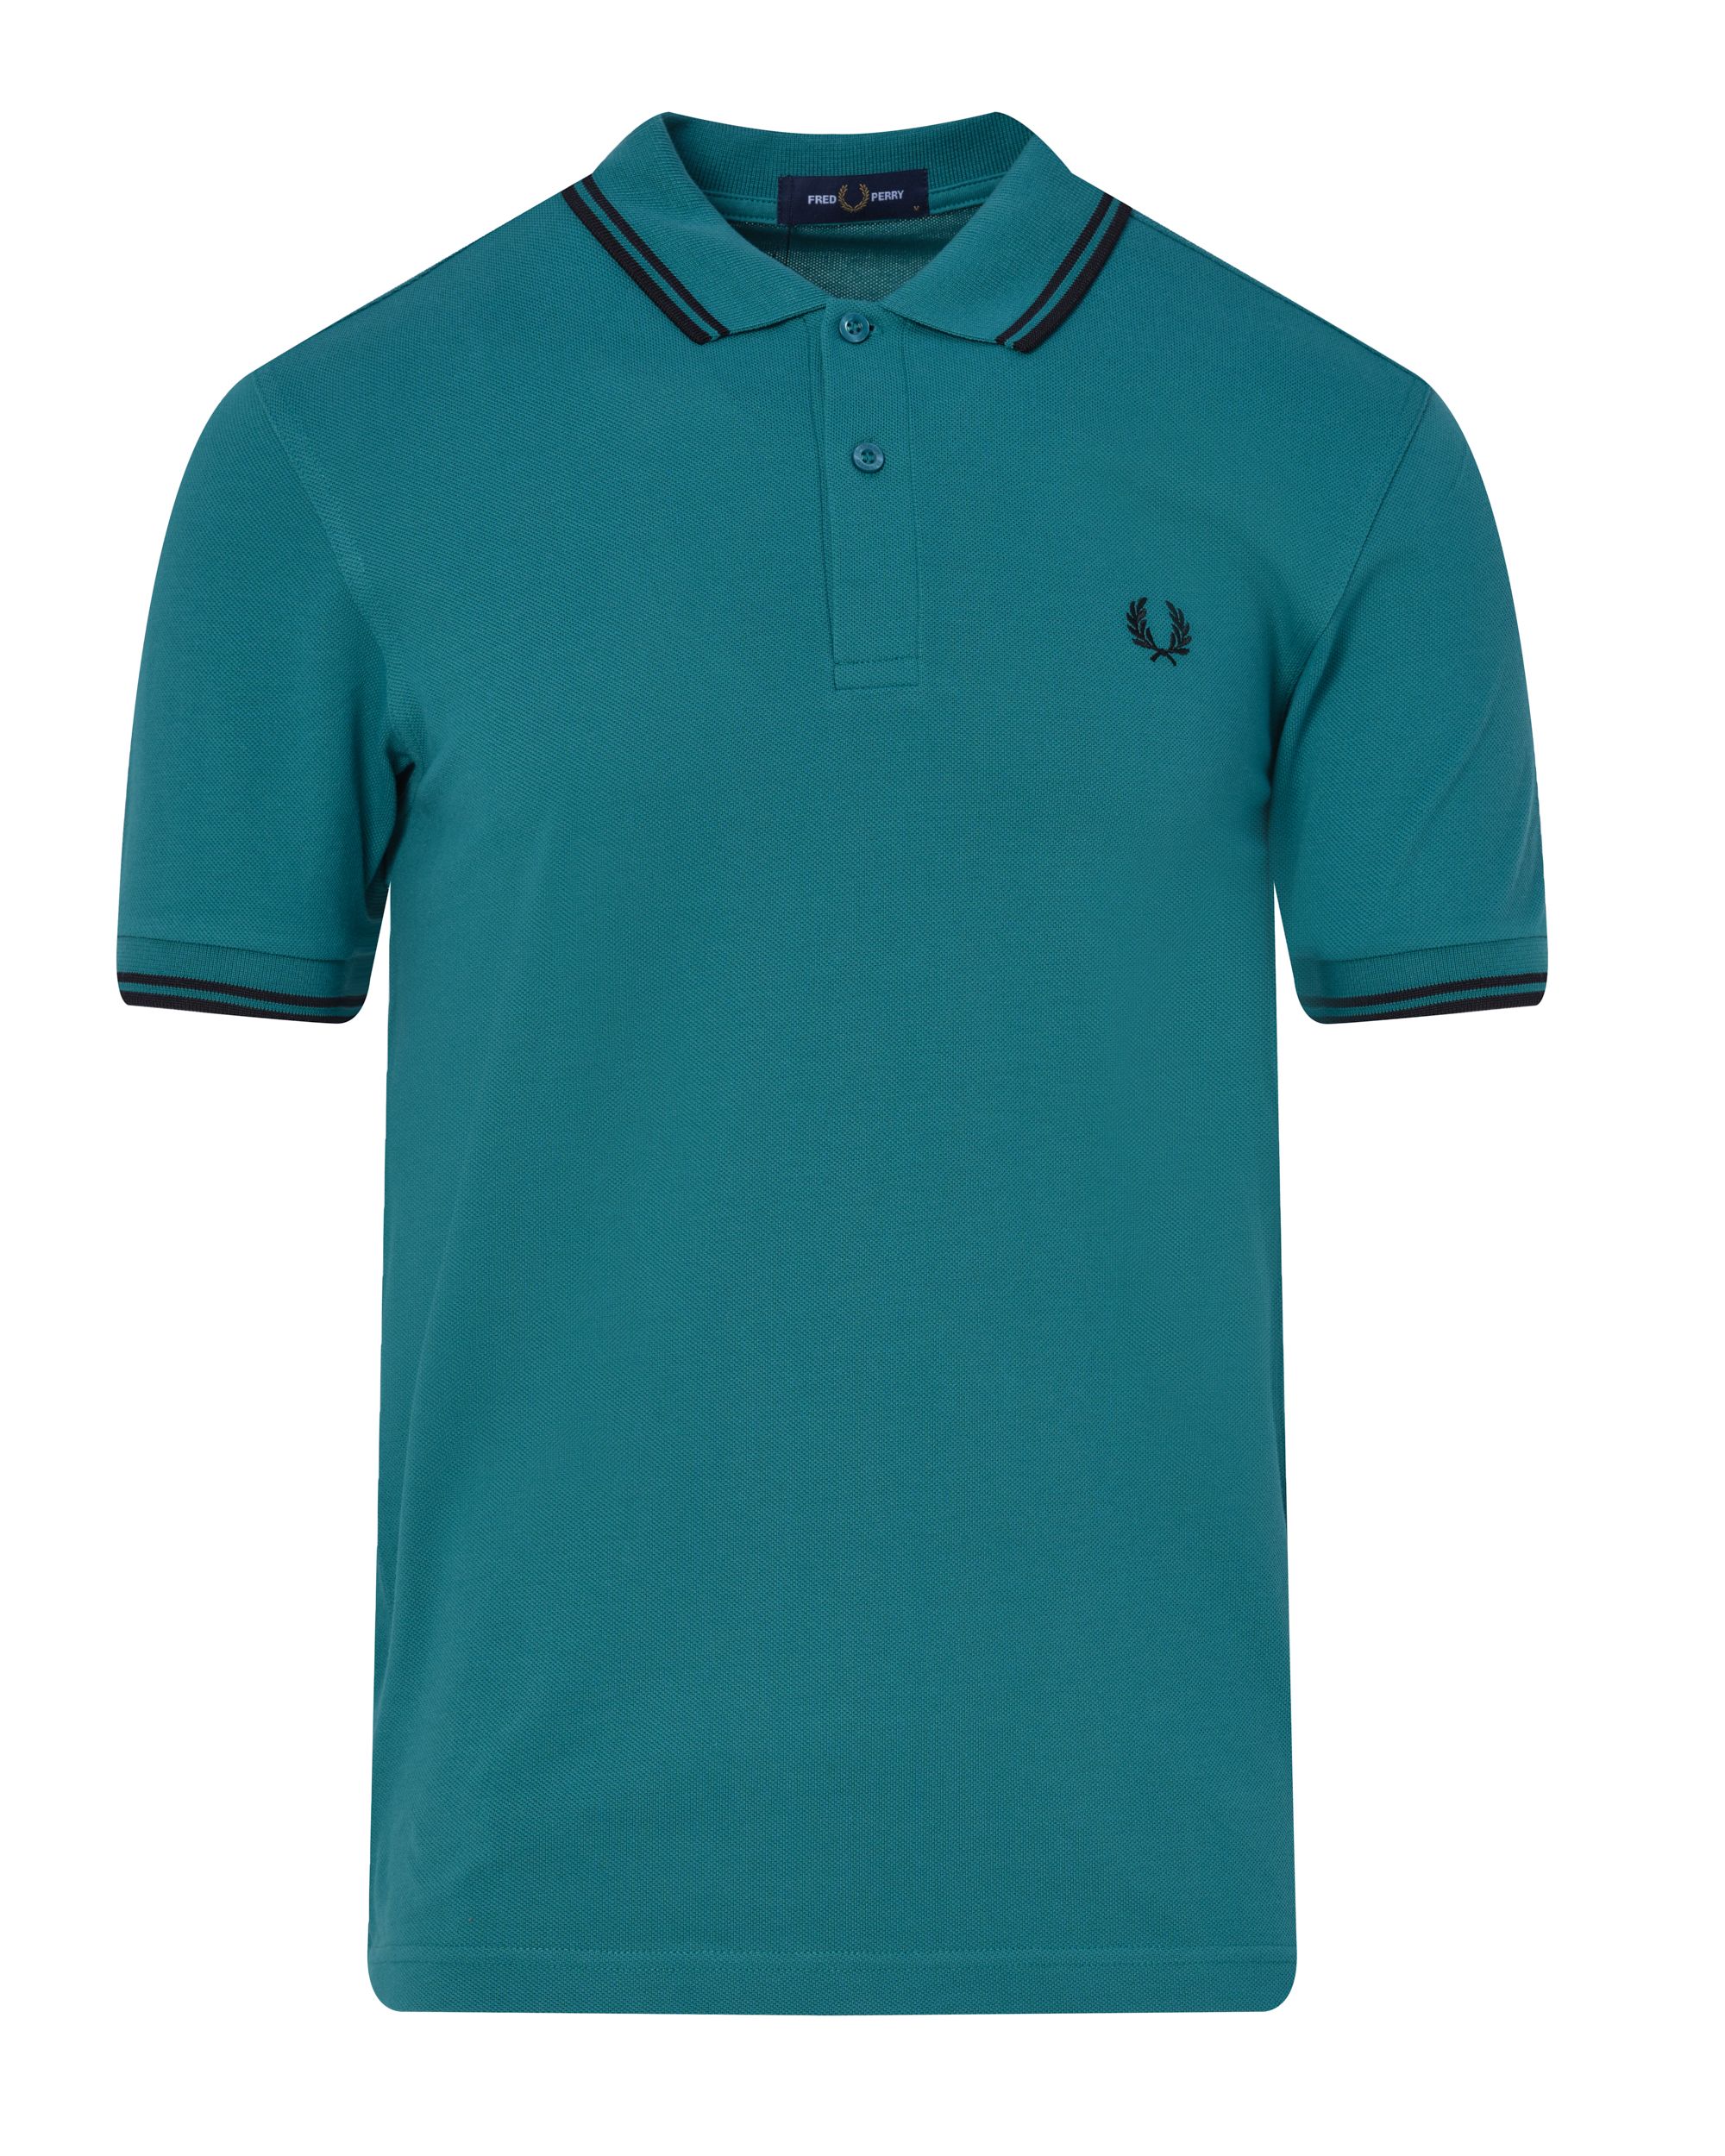 Fred Perry Polo KM Groen 083523-001-L